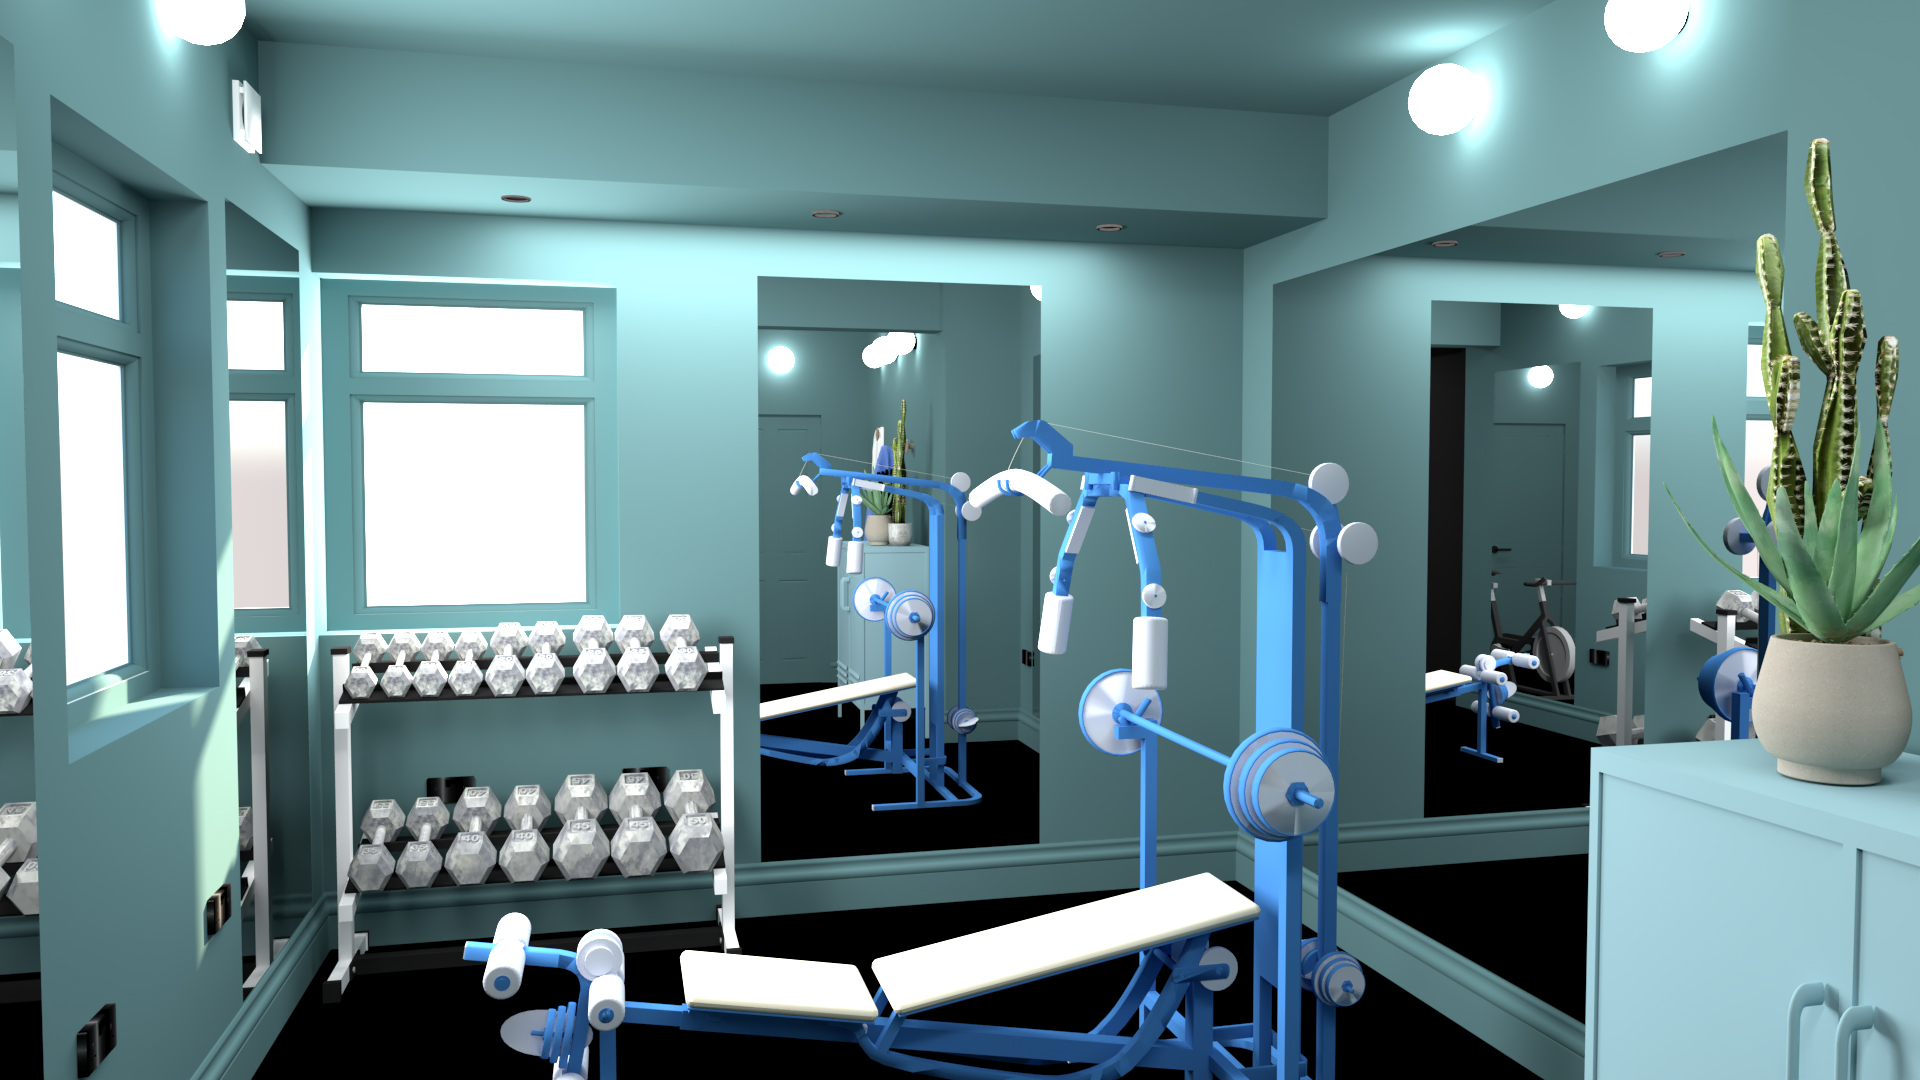 A computer generated image of the proposed gym with darker walls and no borders on the mirrors.